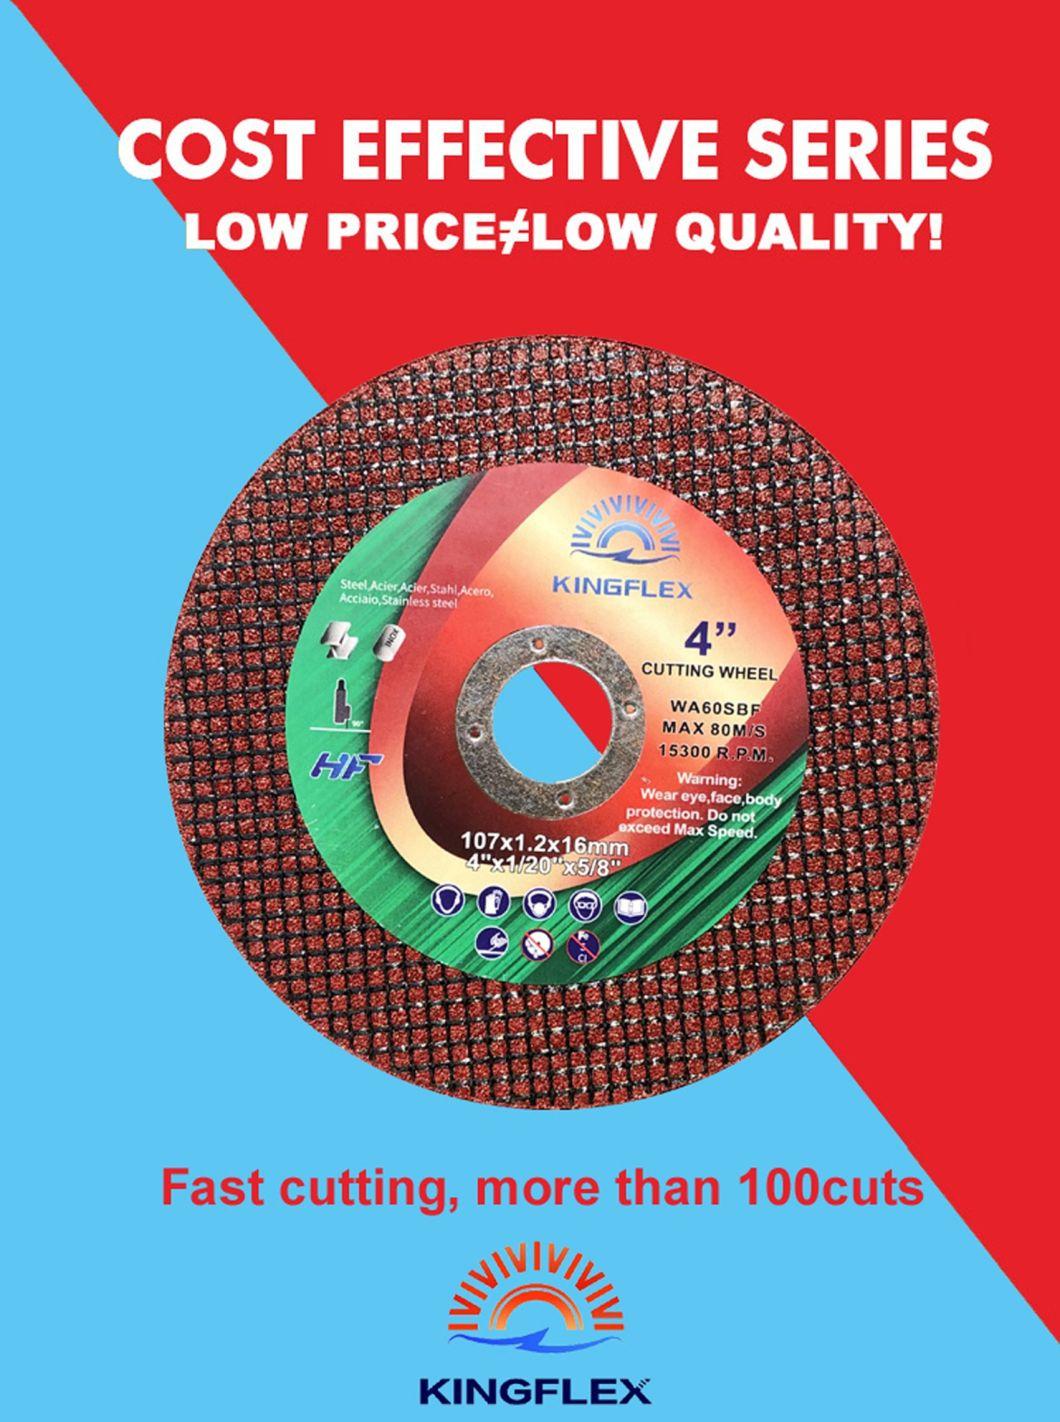 Abrasive Disc, 107X1X16mm, 2nets, Red, Special for Asia Market